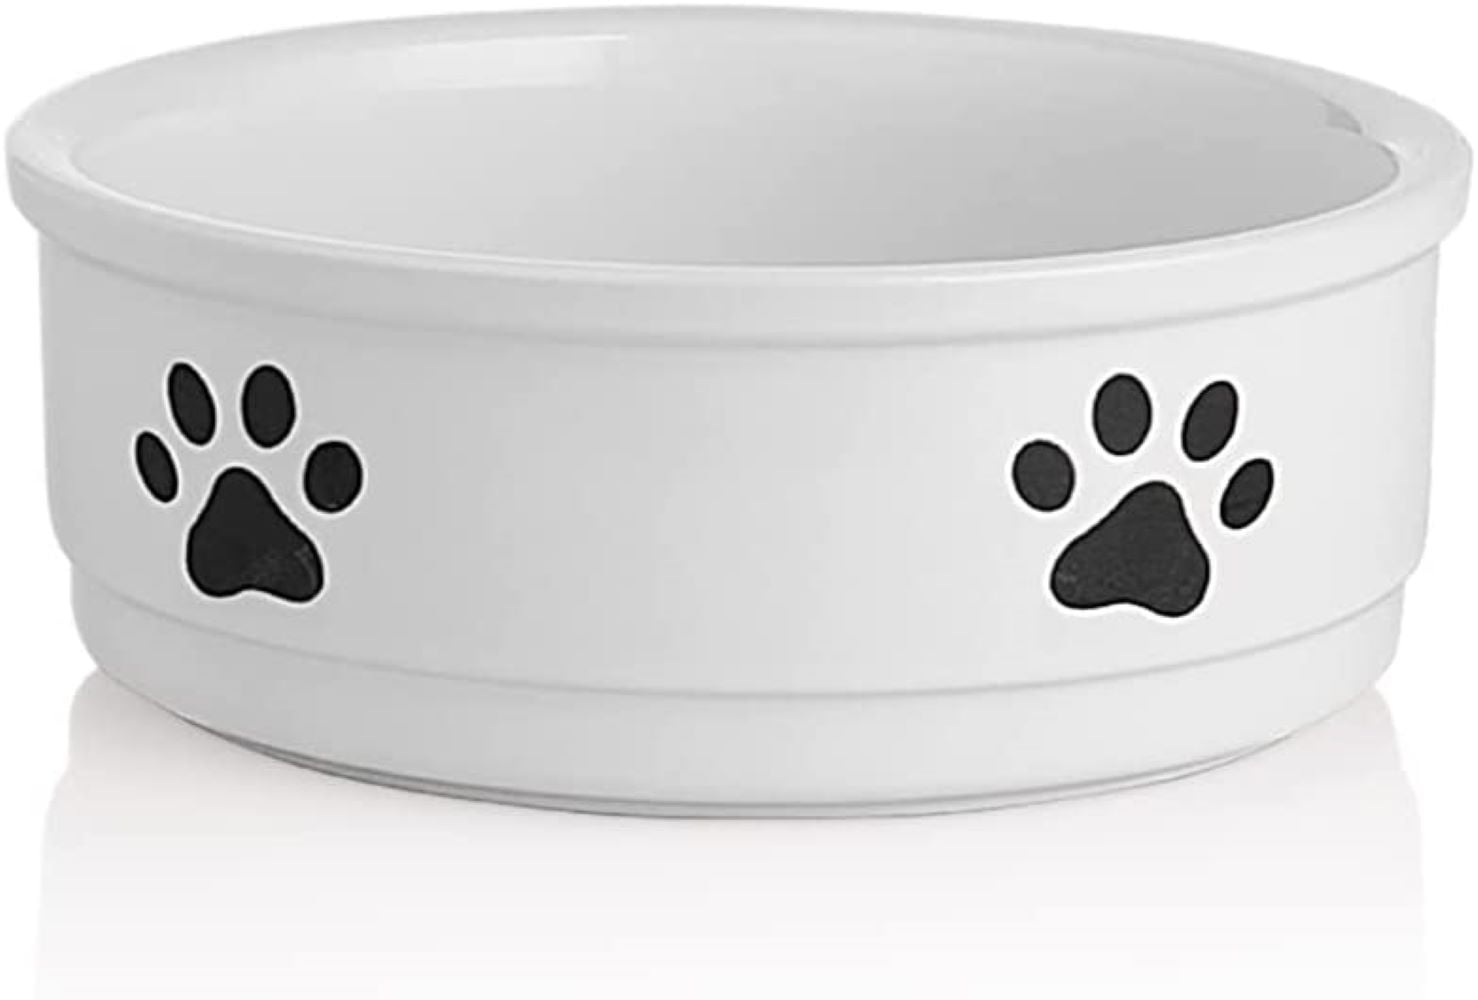 SWEEJAR Ceramic Dog Bowls with Paw Pattern,Dog Food Dish for Large